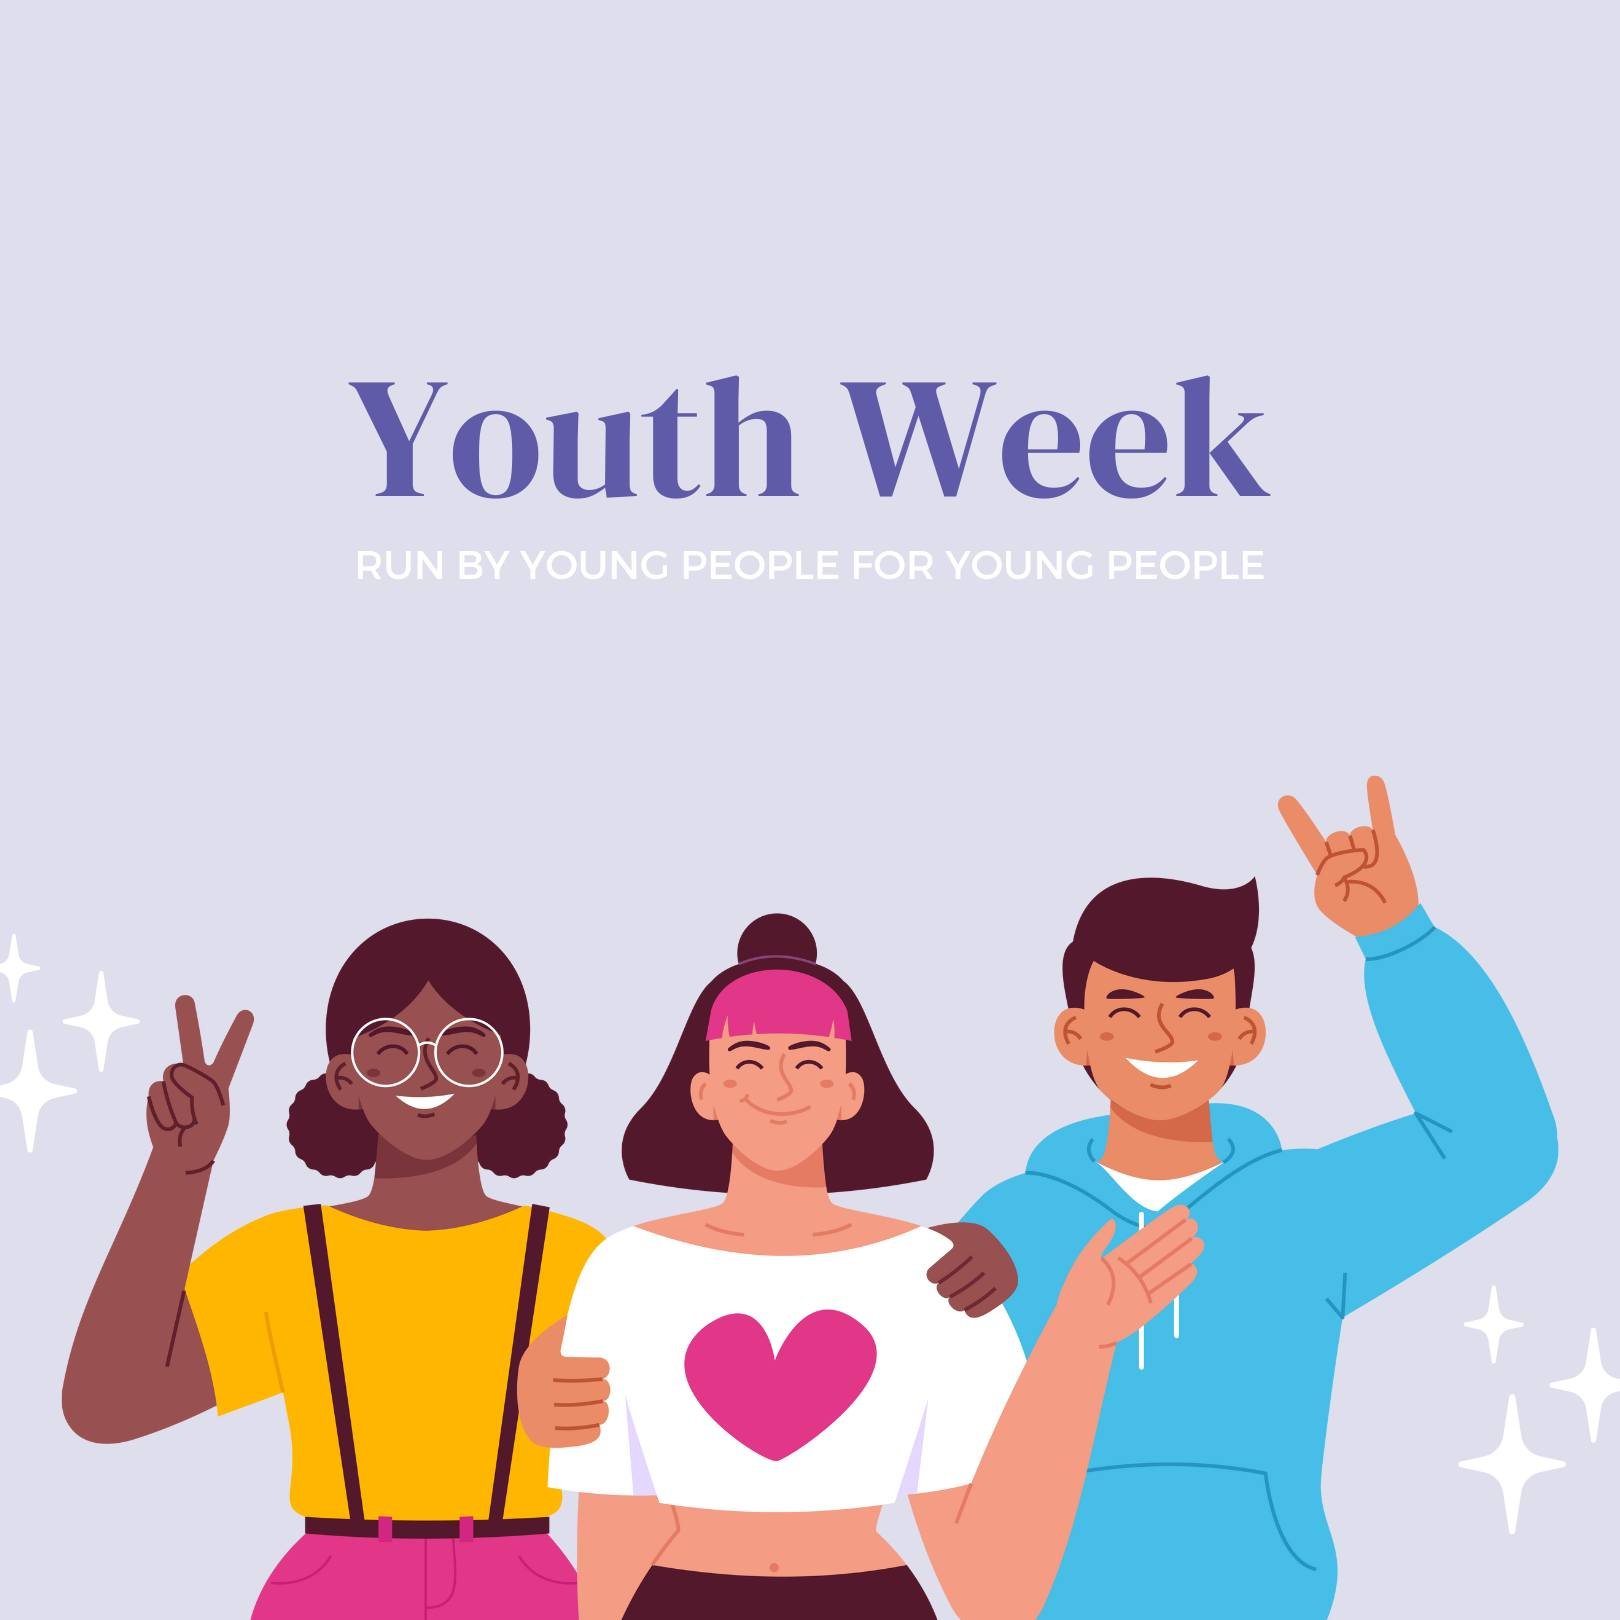 Youth Week as begun! Each year, Lane Cove Council works with young people from our region to create Youth Week events. There are a bunch of events planned for this week, including Battle of the Bands and art celebrations!

📆 11 April to 21 April

Vi